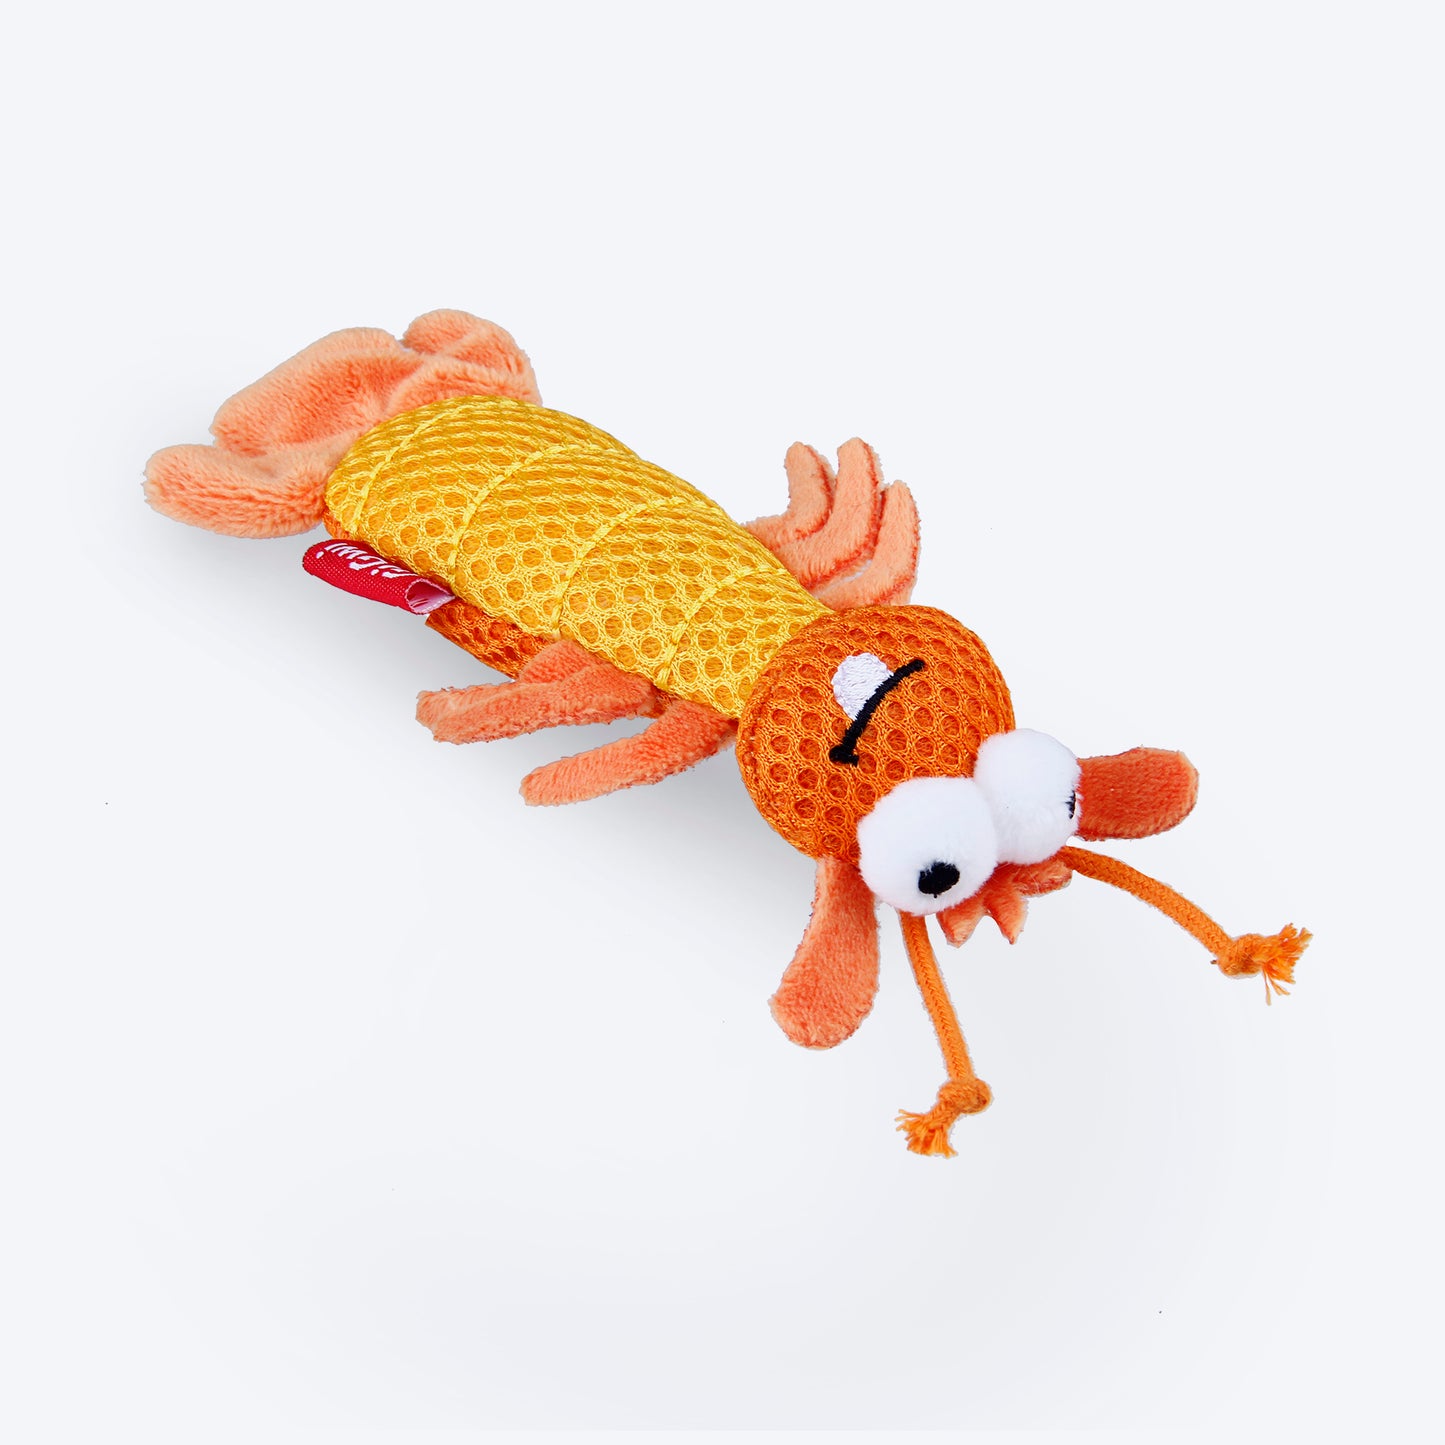 GiGwi Dental Mesh Shrimp With Catnip Interactive Cat Toy - Heads Up For Tails